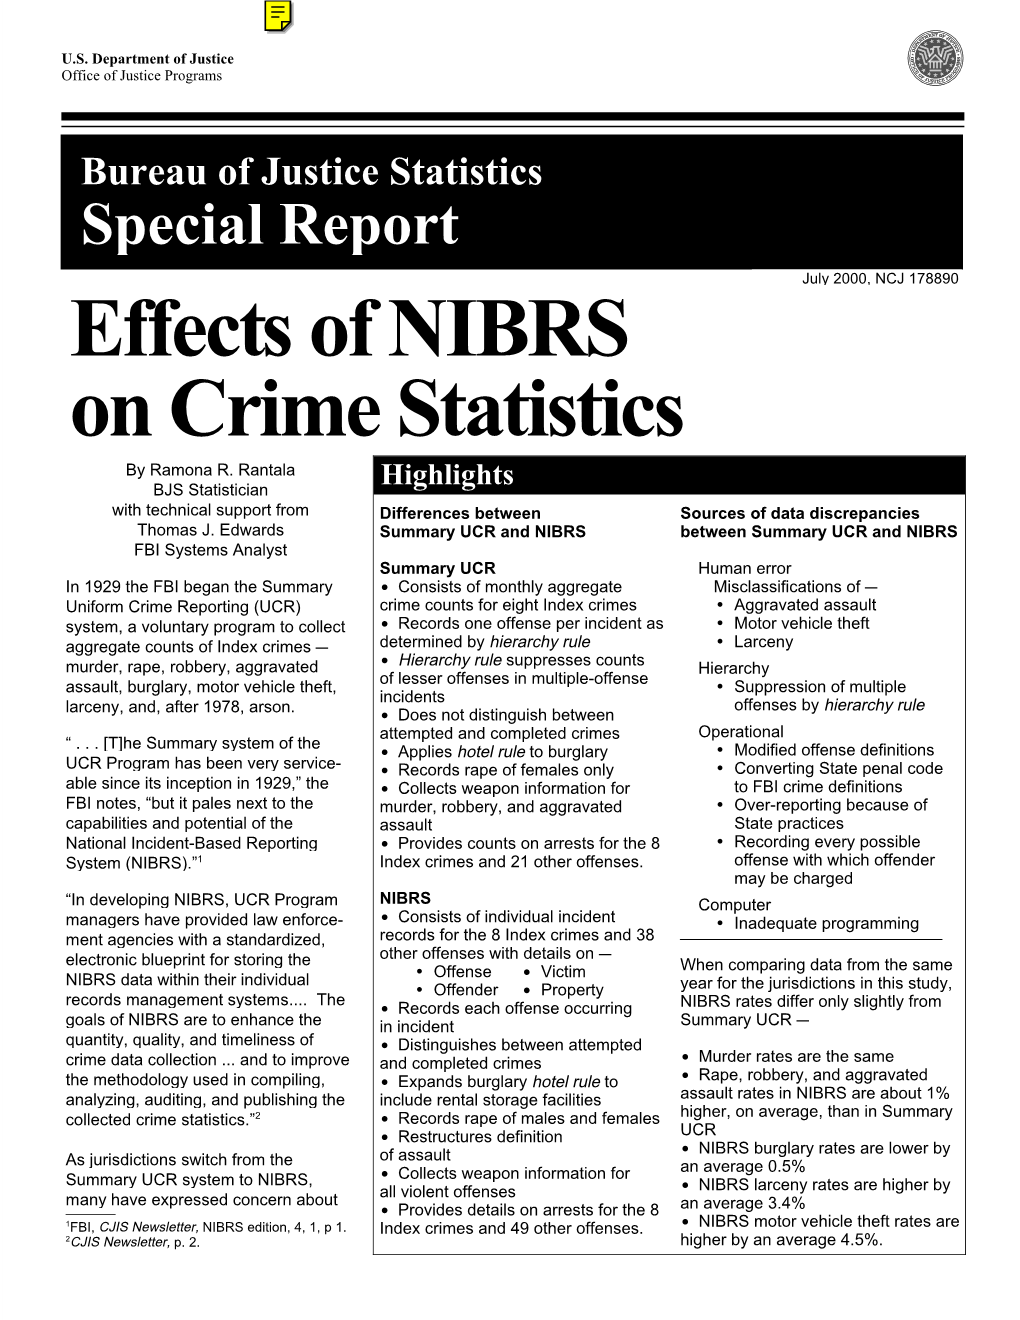 Effects of NIBRS on Crime Statistics by Ramona R